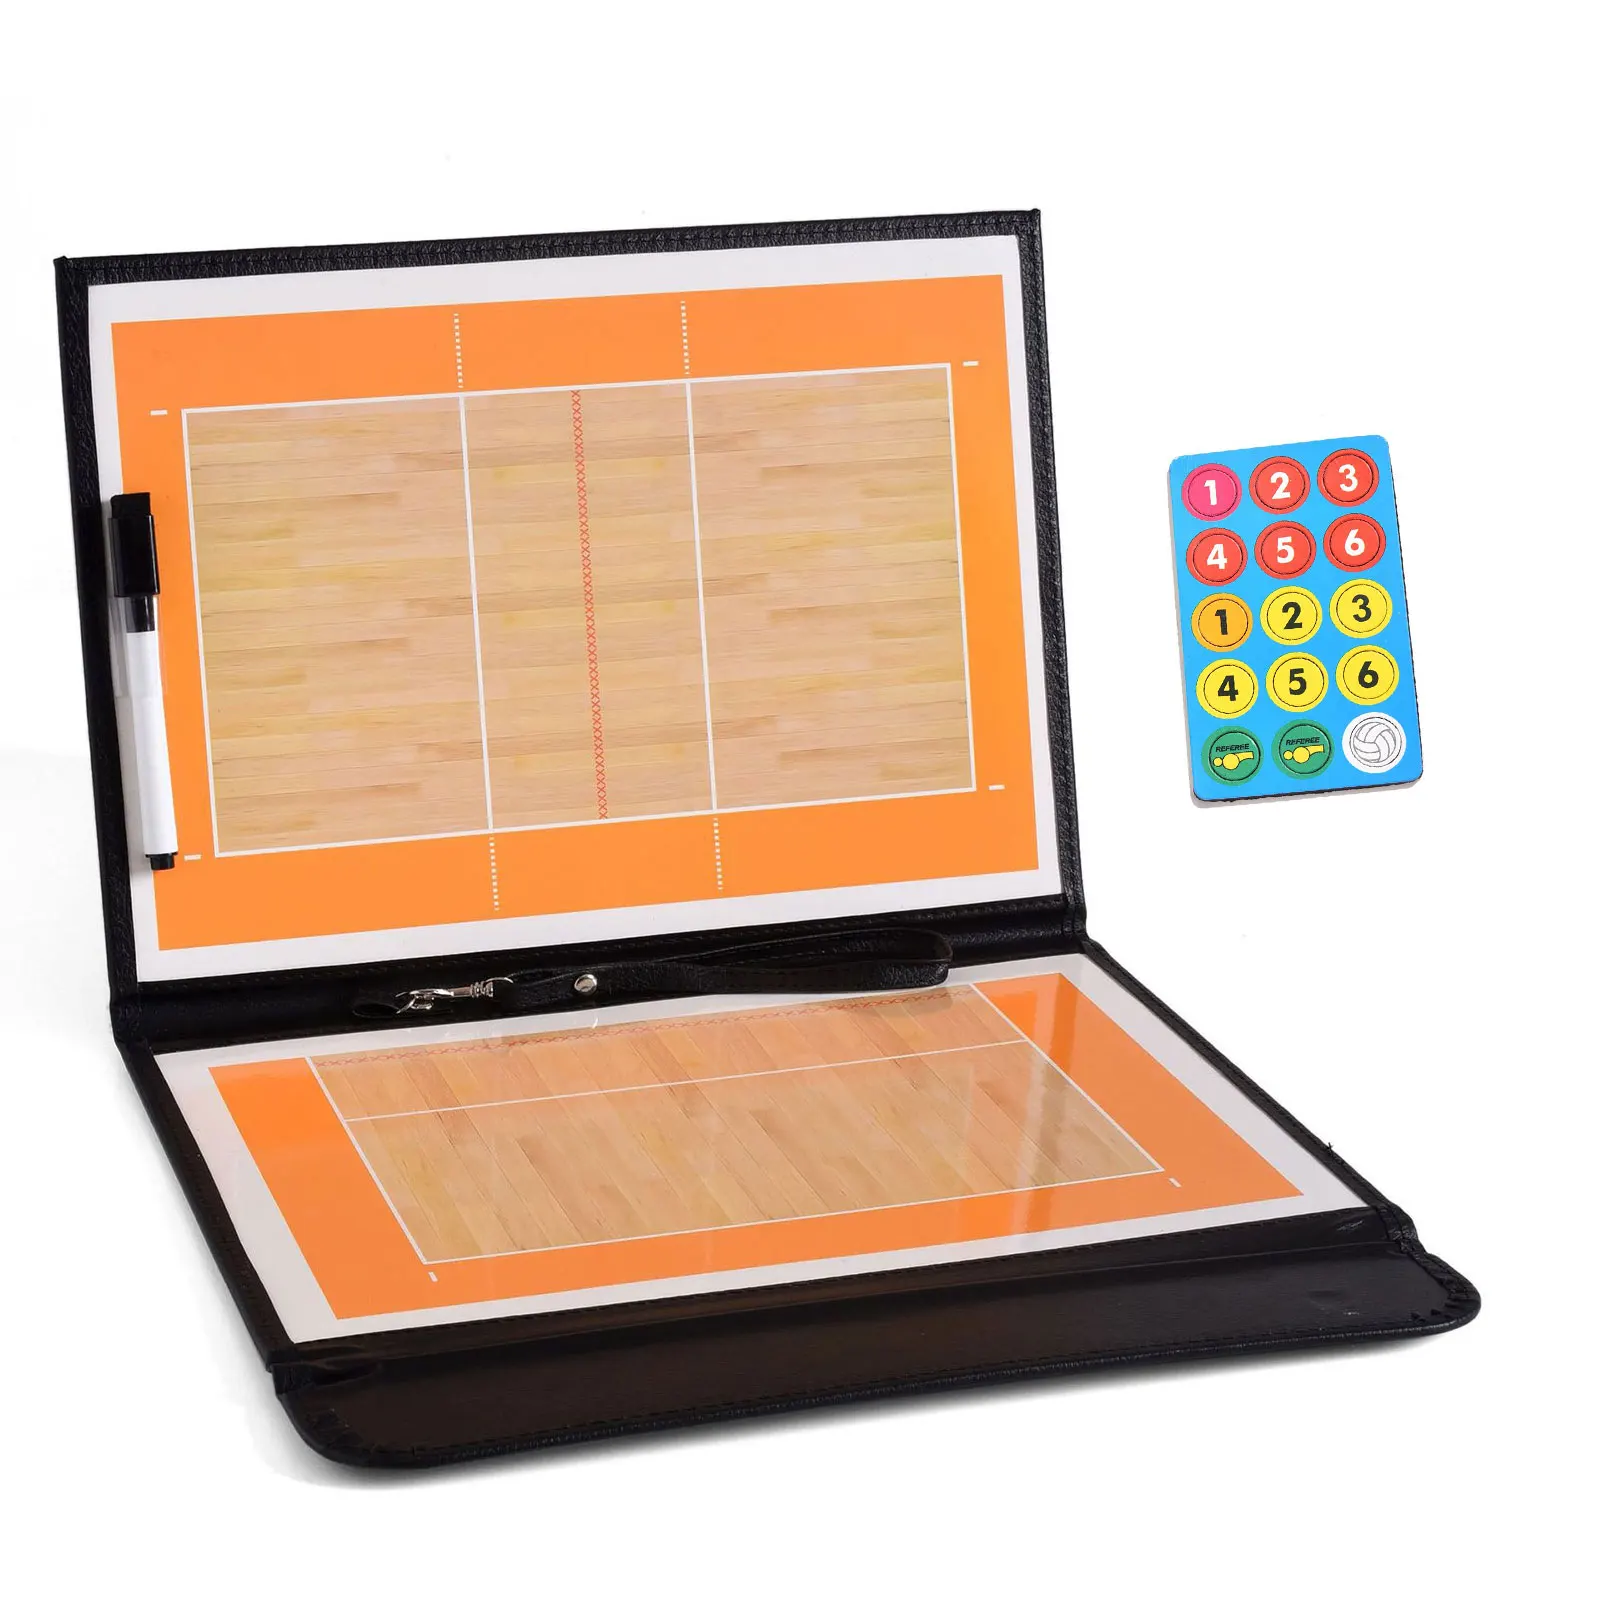 

Coaches Board Collapsible Volleyball Coaching Board For Volleyball Training Dry Erase Tactics Coach Board Clipboard With Marker